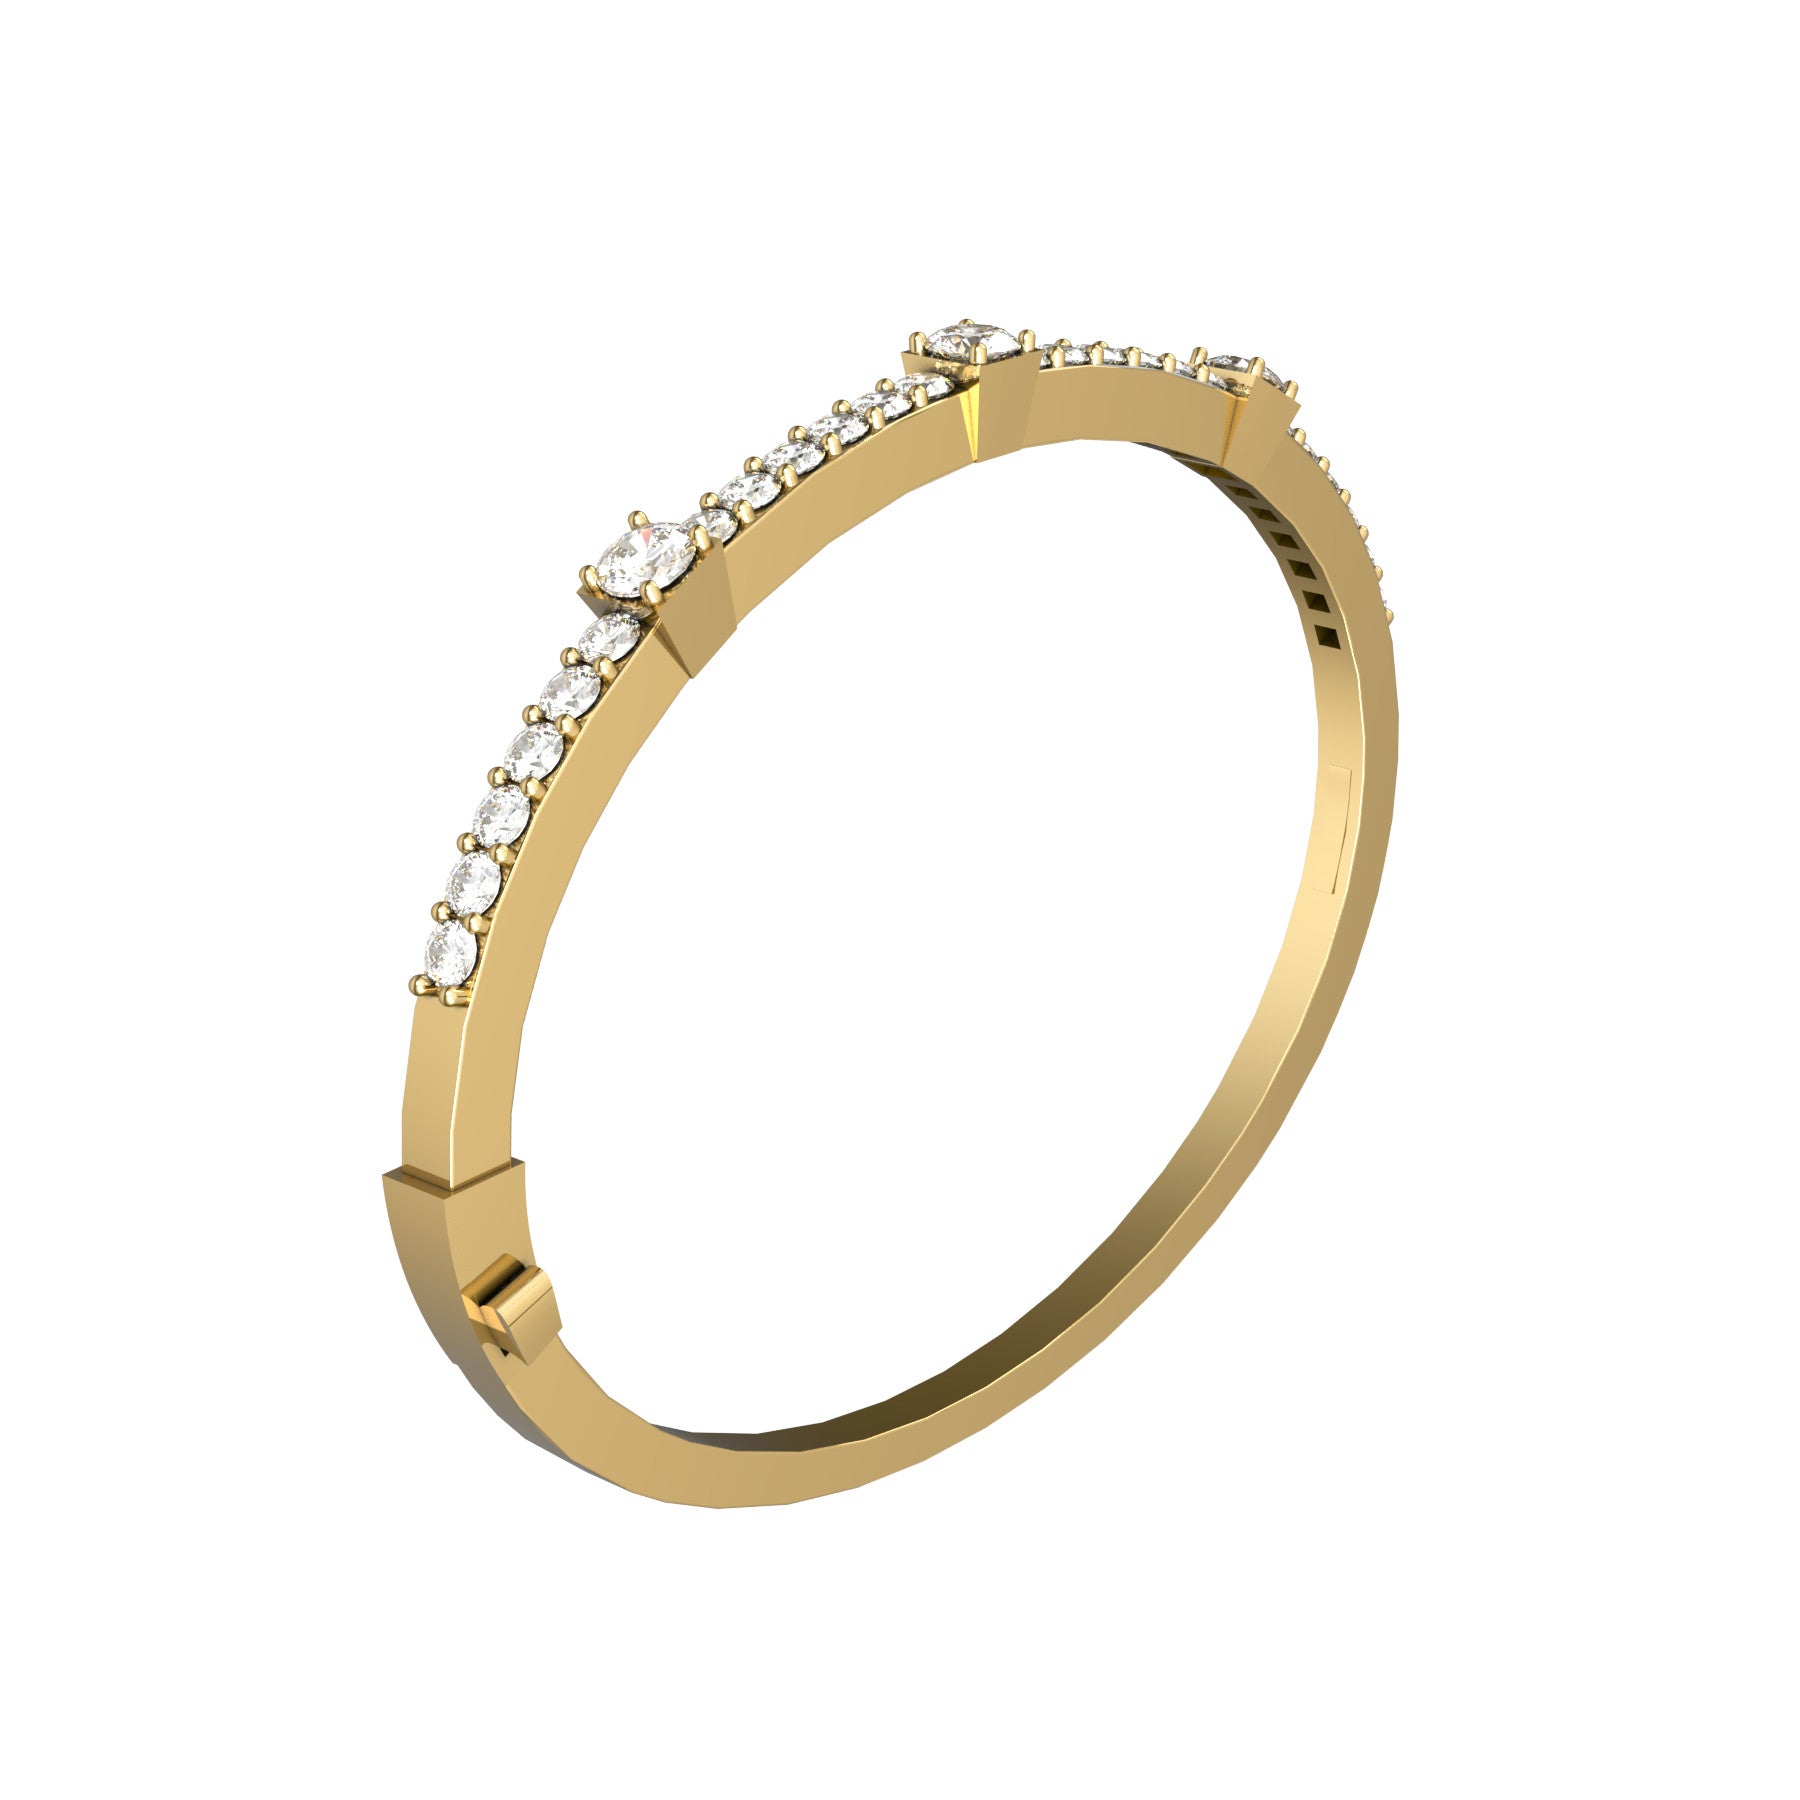 vesper rigid bracelet, natural round diamonds, 18 K yellow gold, weight  about 15,0 to 32,4 g (0.53 to 1.14 oz); width 4,0 mm max